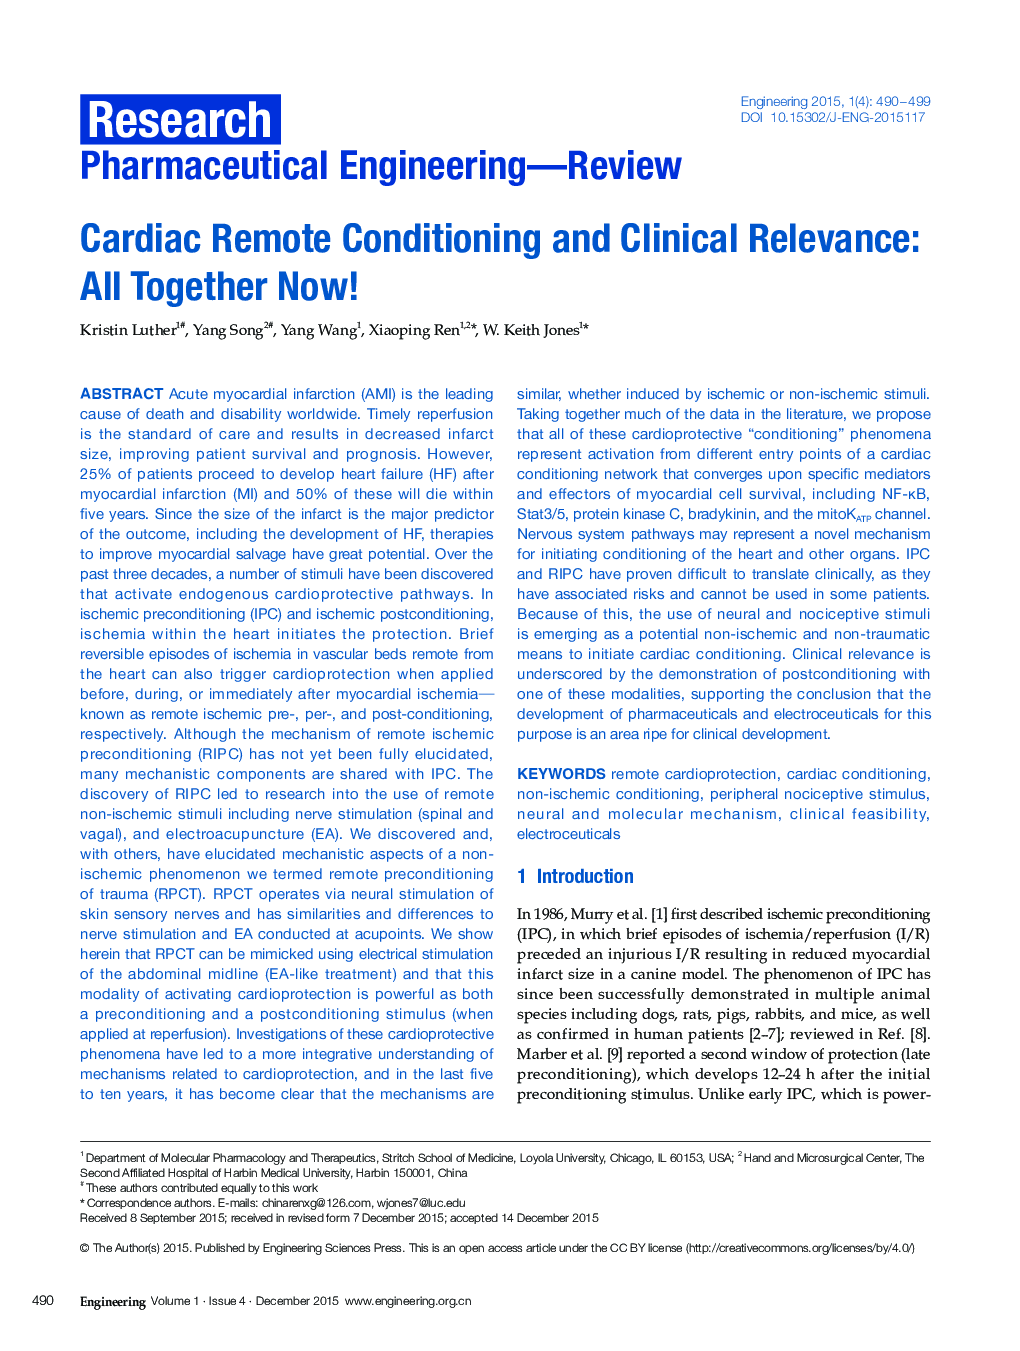 Cardiac Remote Conditioning and Clinical Relevance: All Together Now!